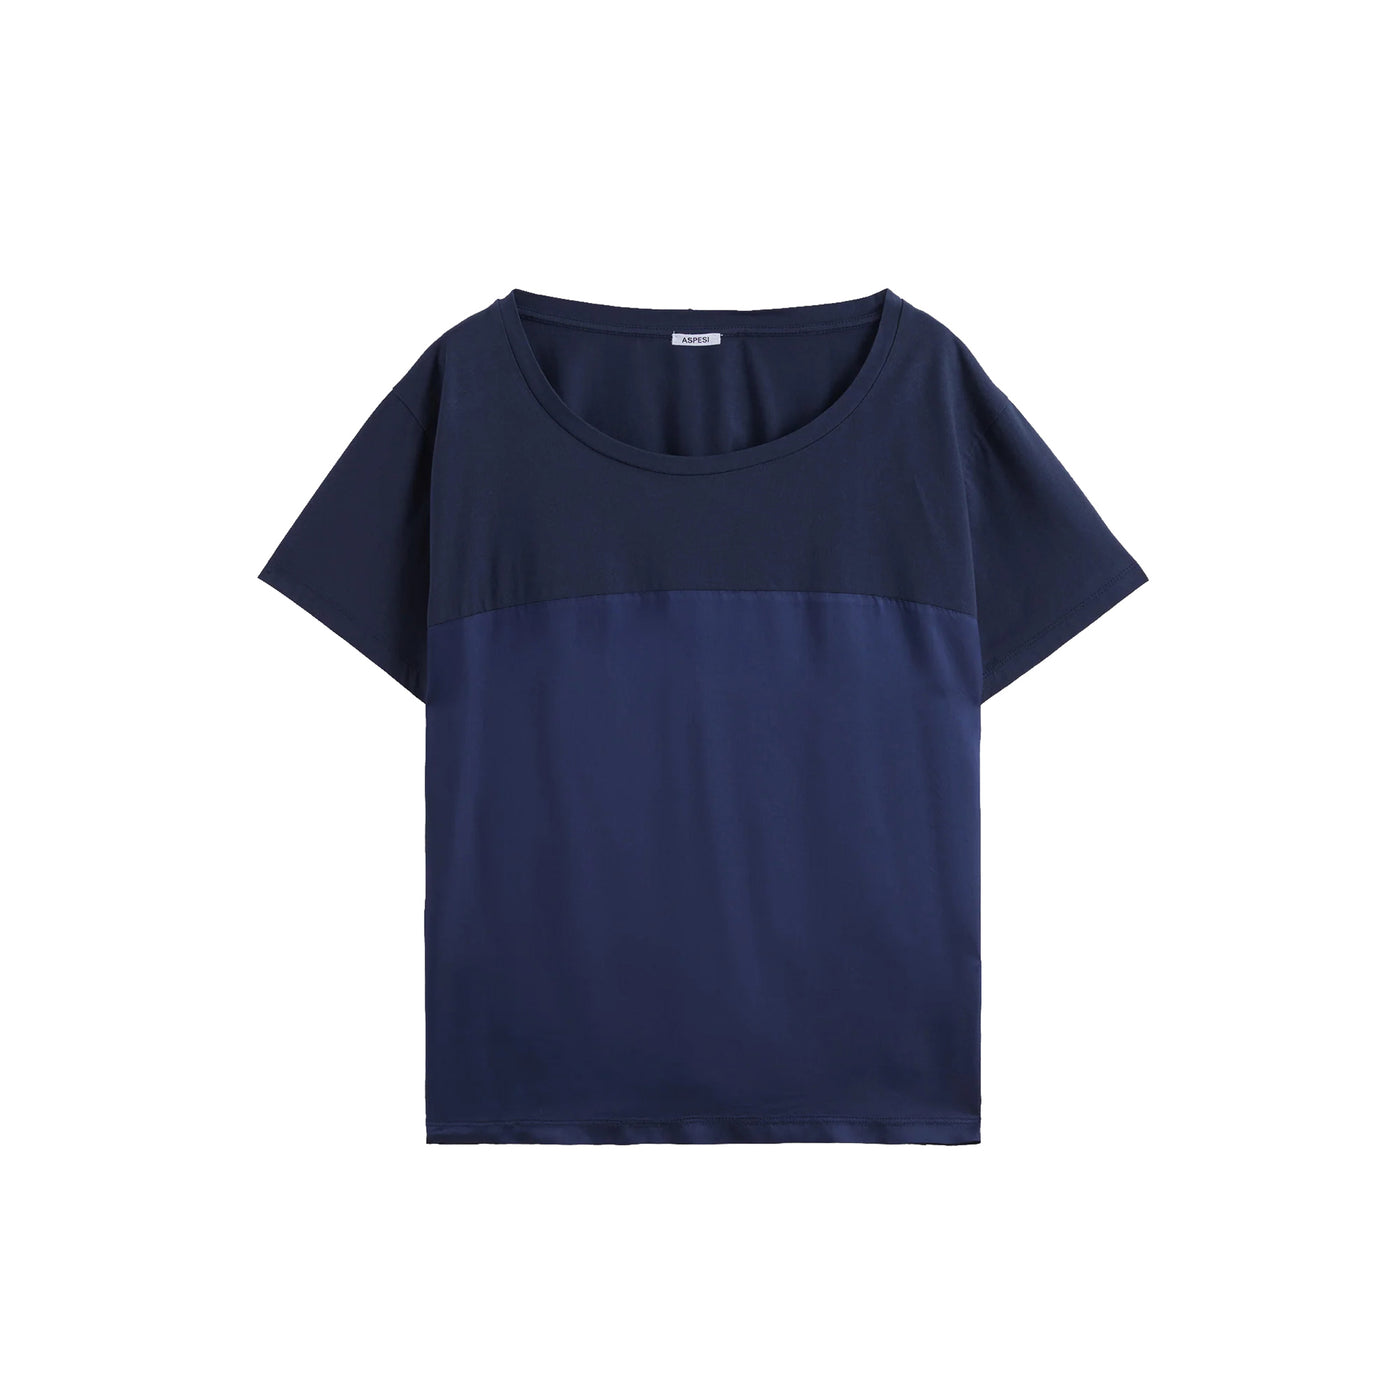 Women's T-Shirt with wide neck